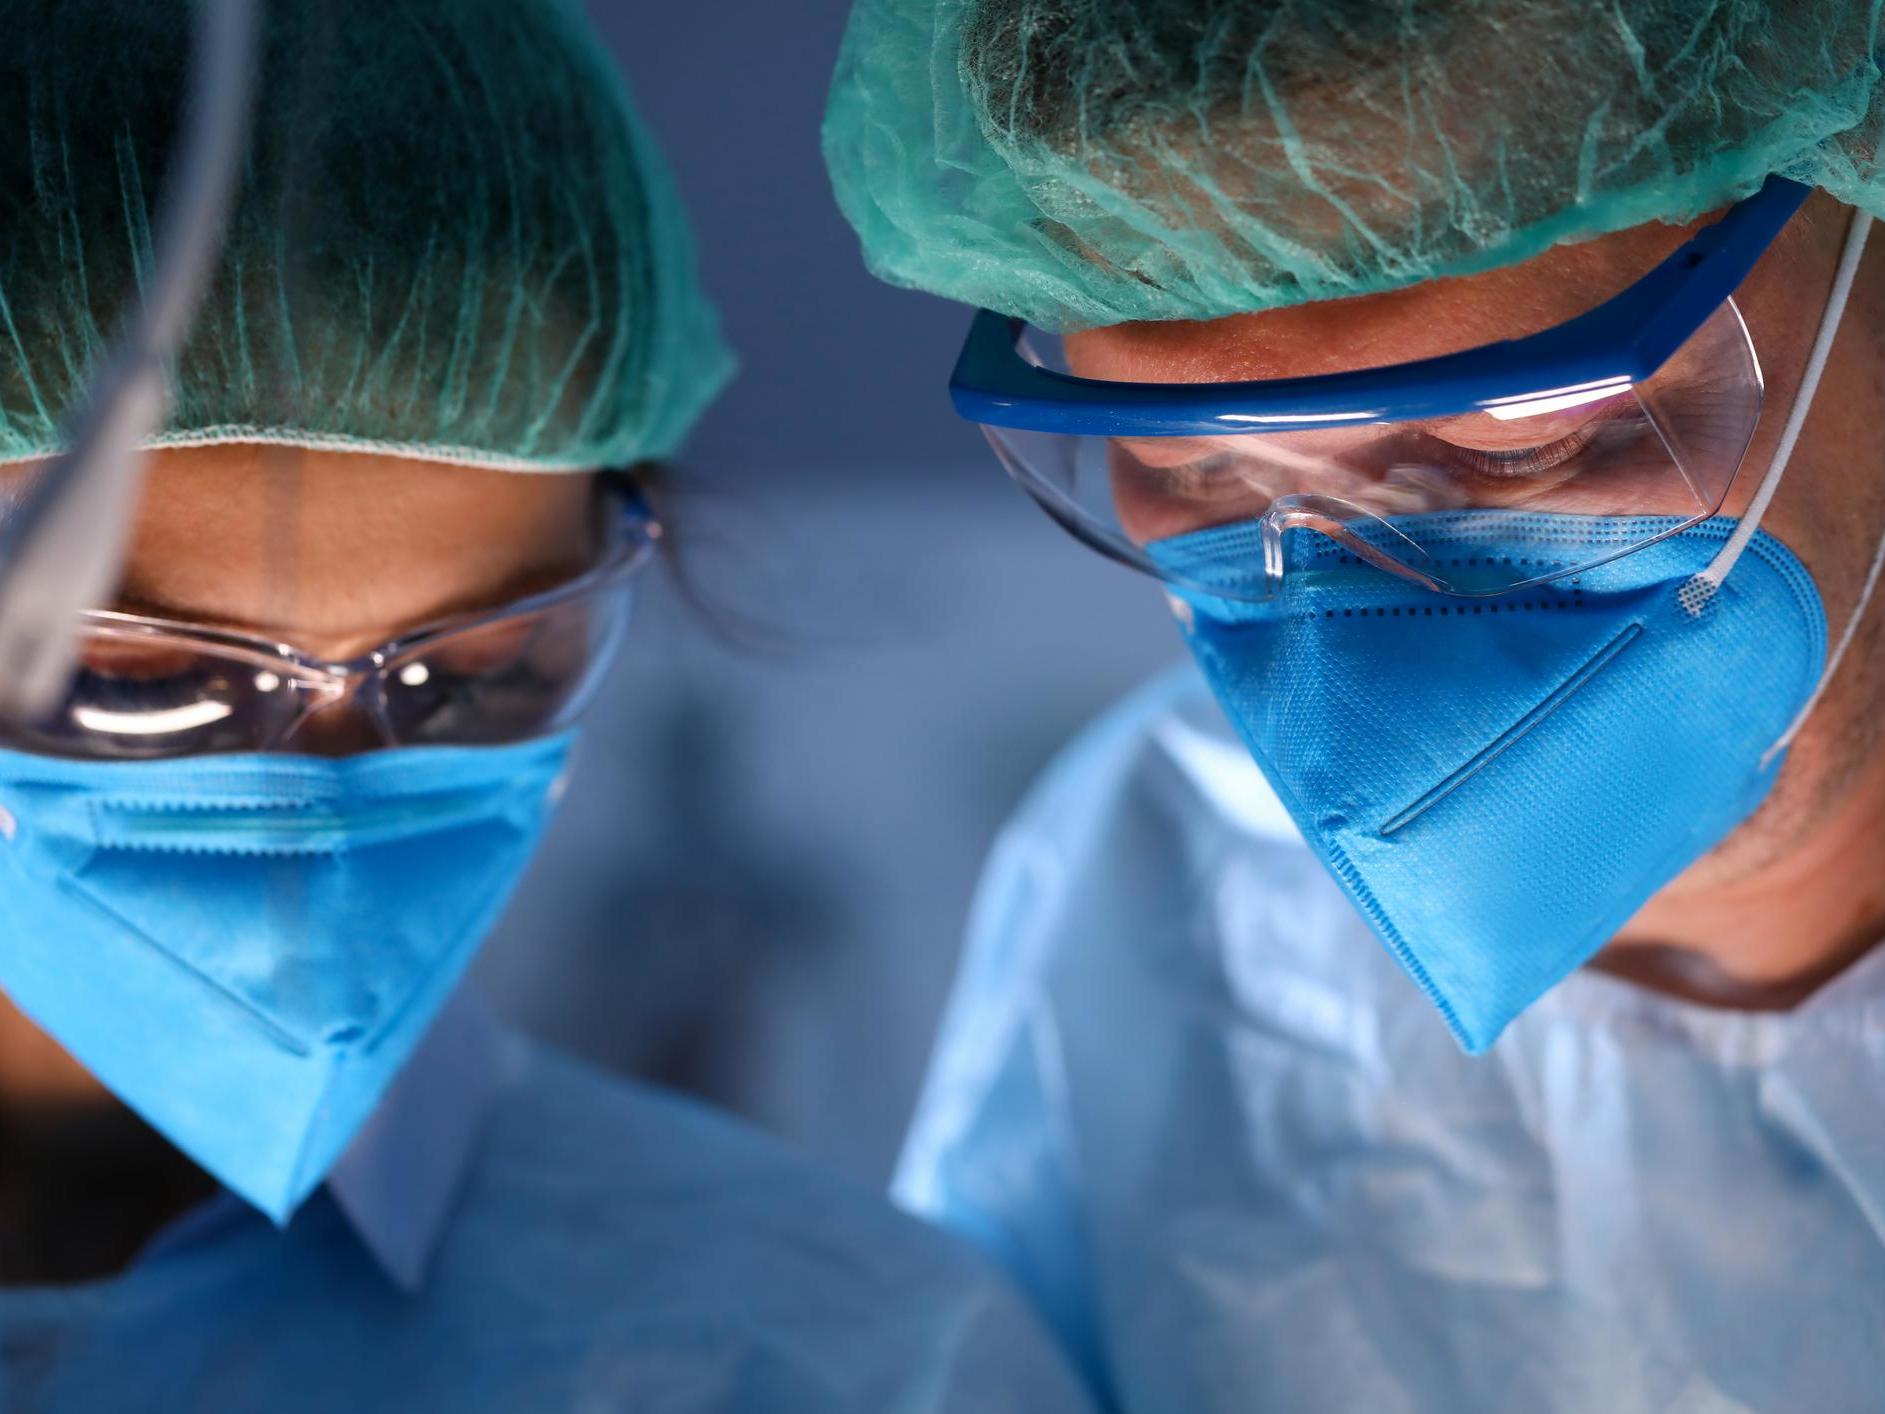 Third of surgeons said PPE supply was inadequate at their hospital